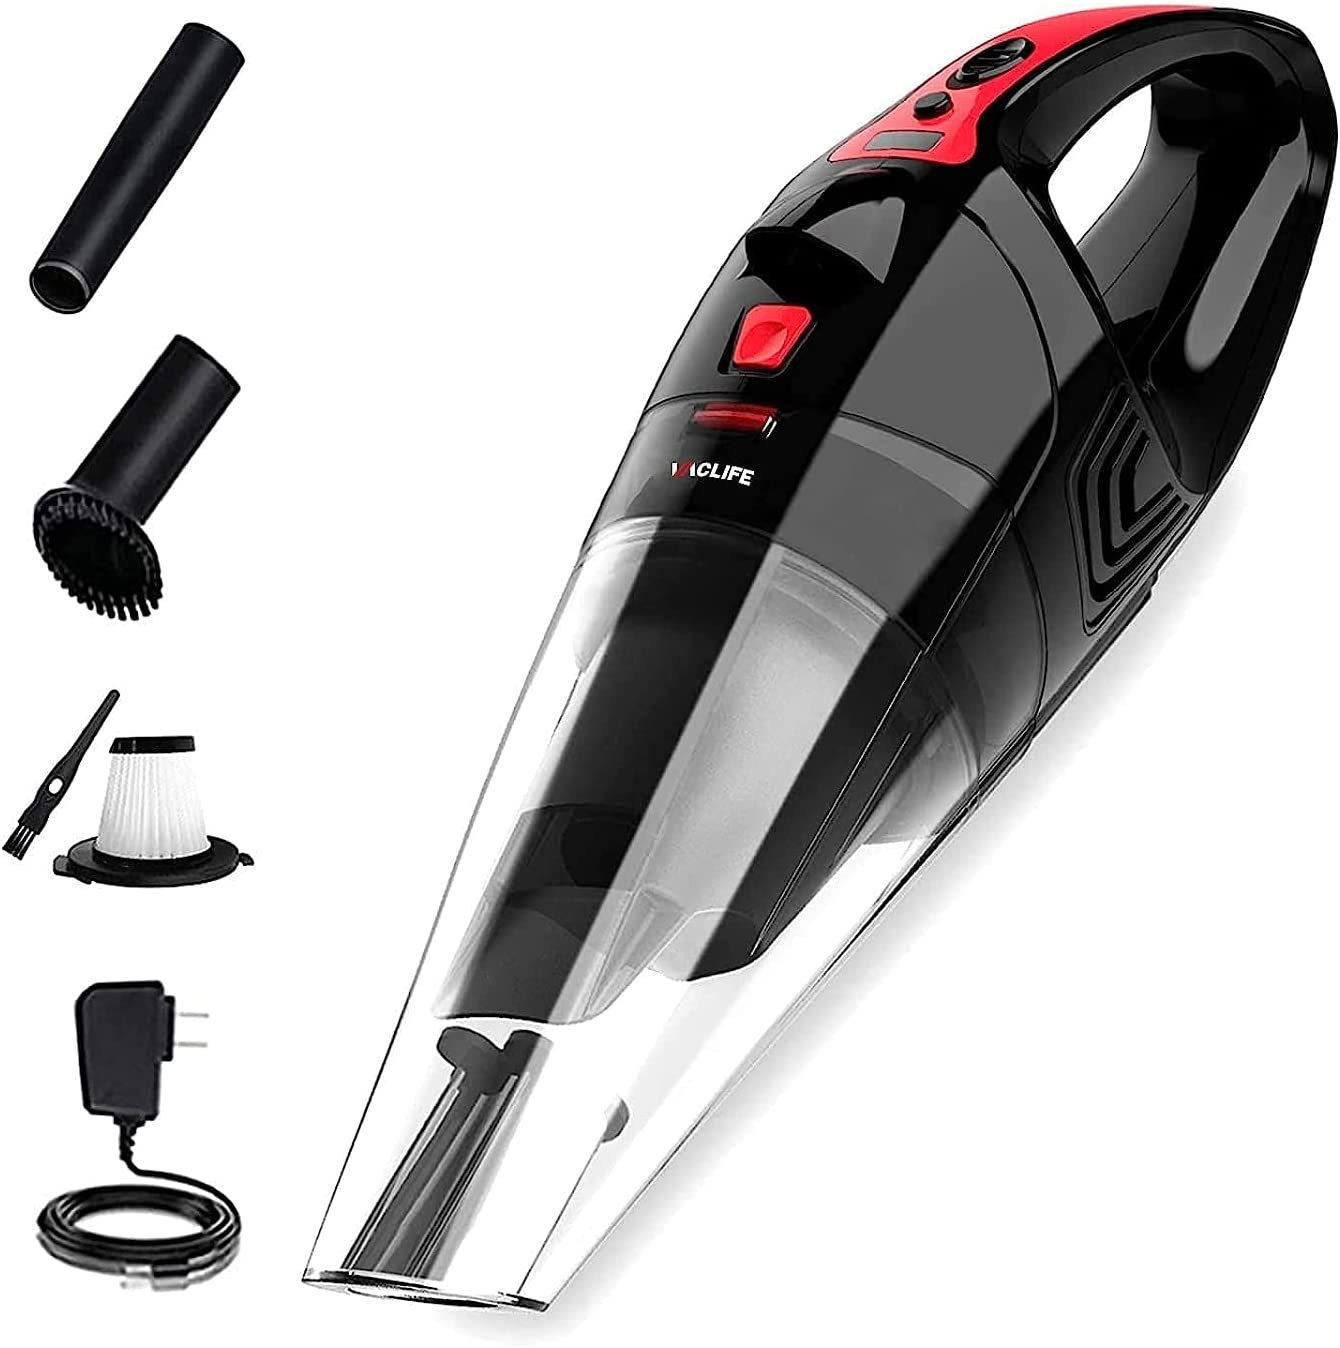 Powools Car Vacuum Cordless Rechargeable with 2 Filters- Handheld Vacu